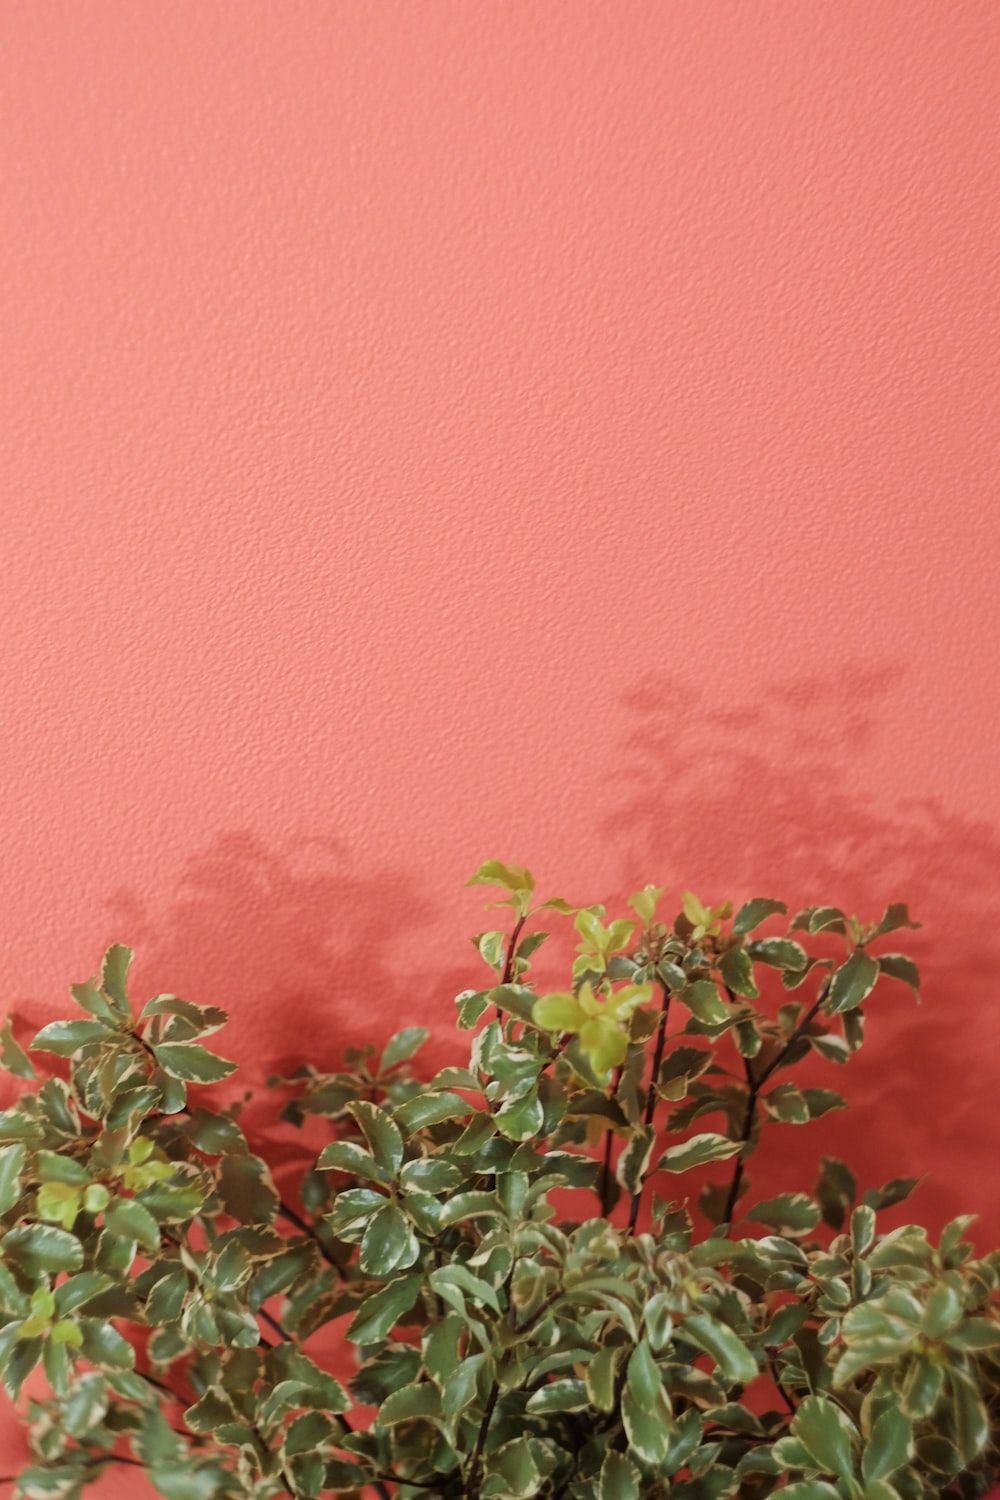 A green plant in front of a red wall - Coral